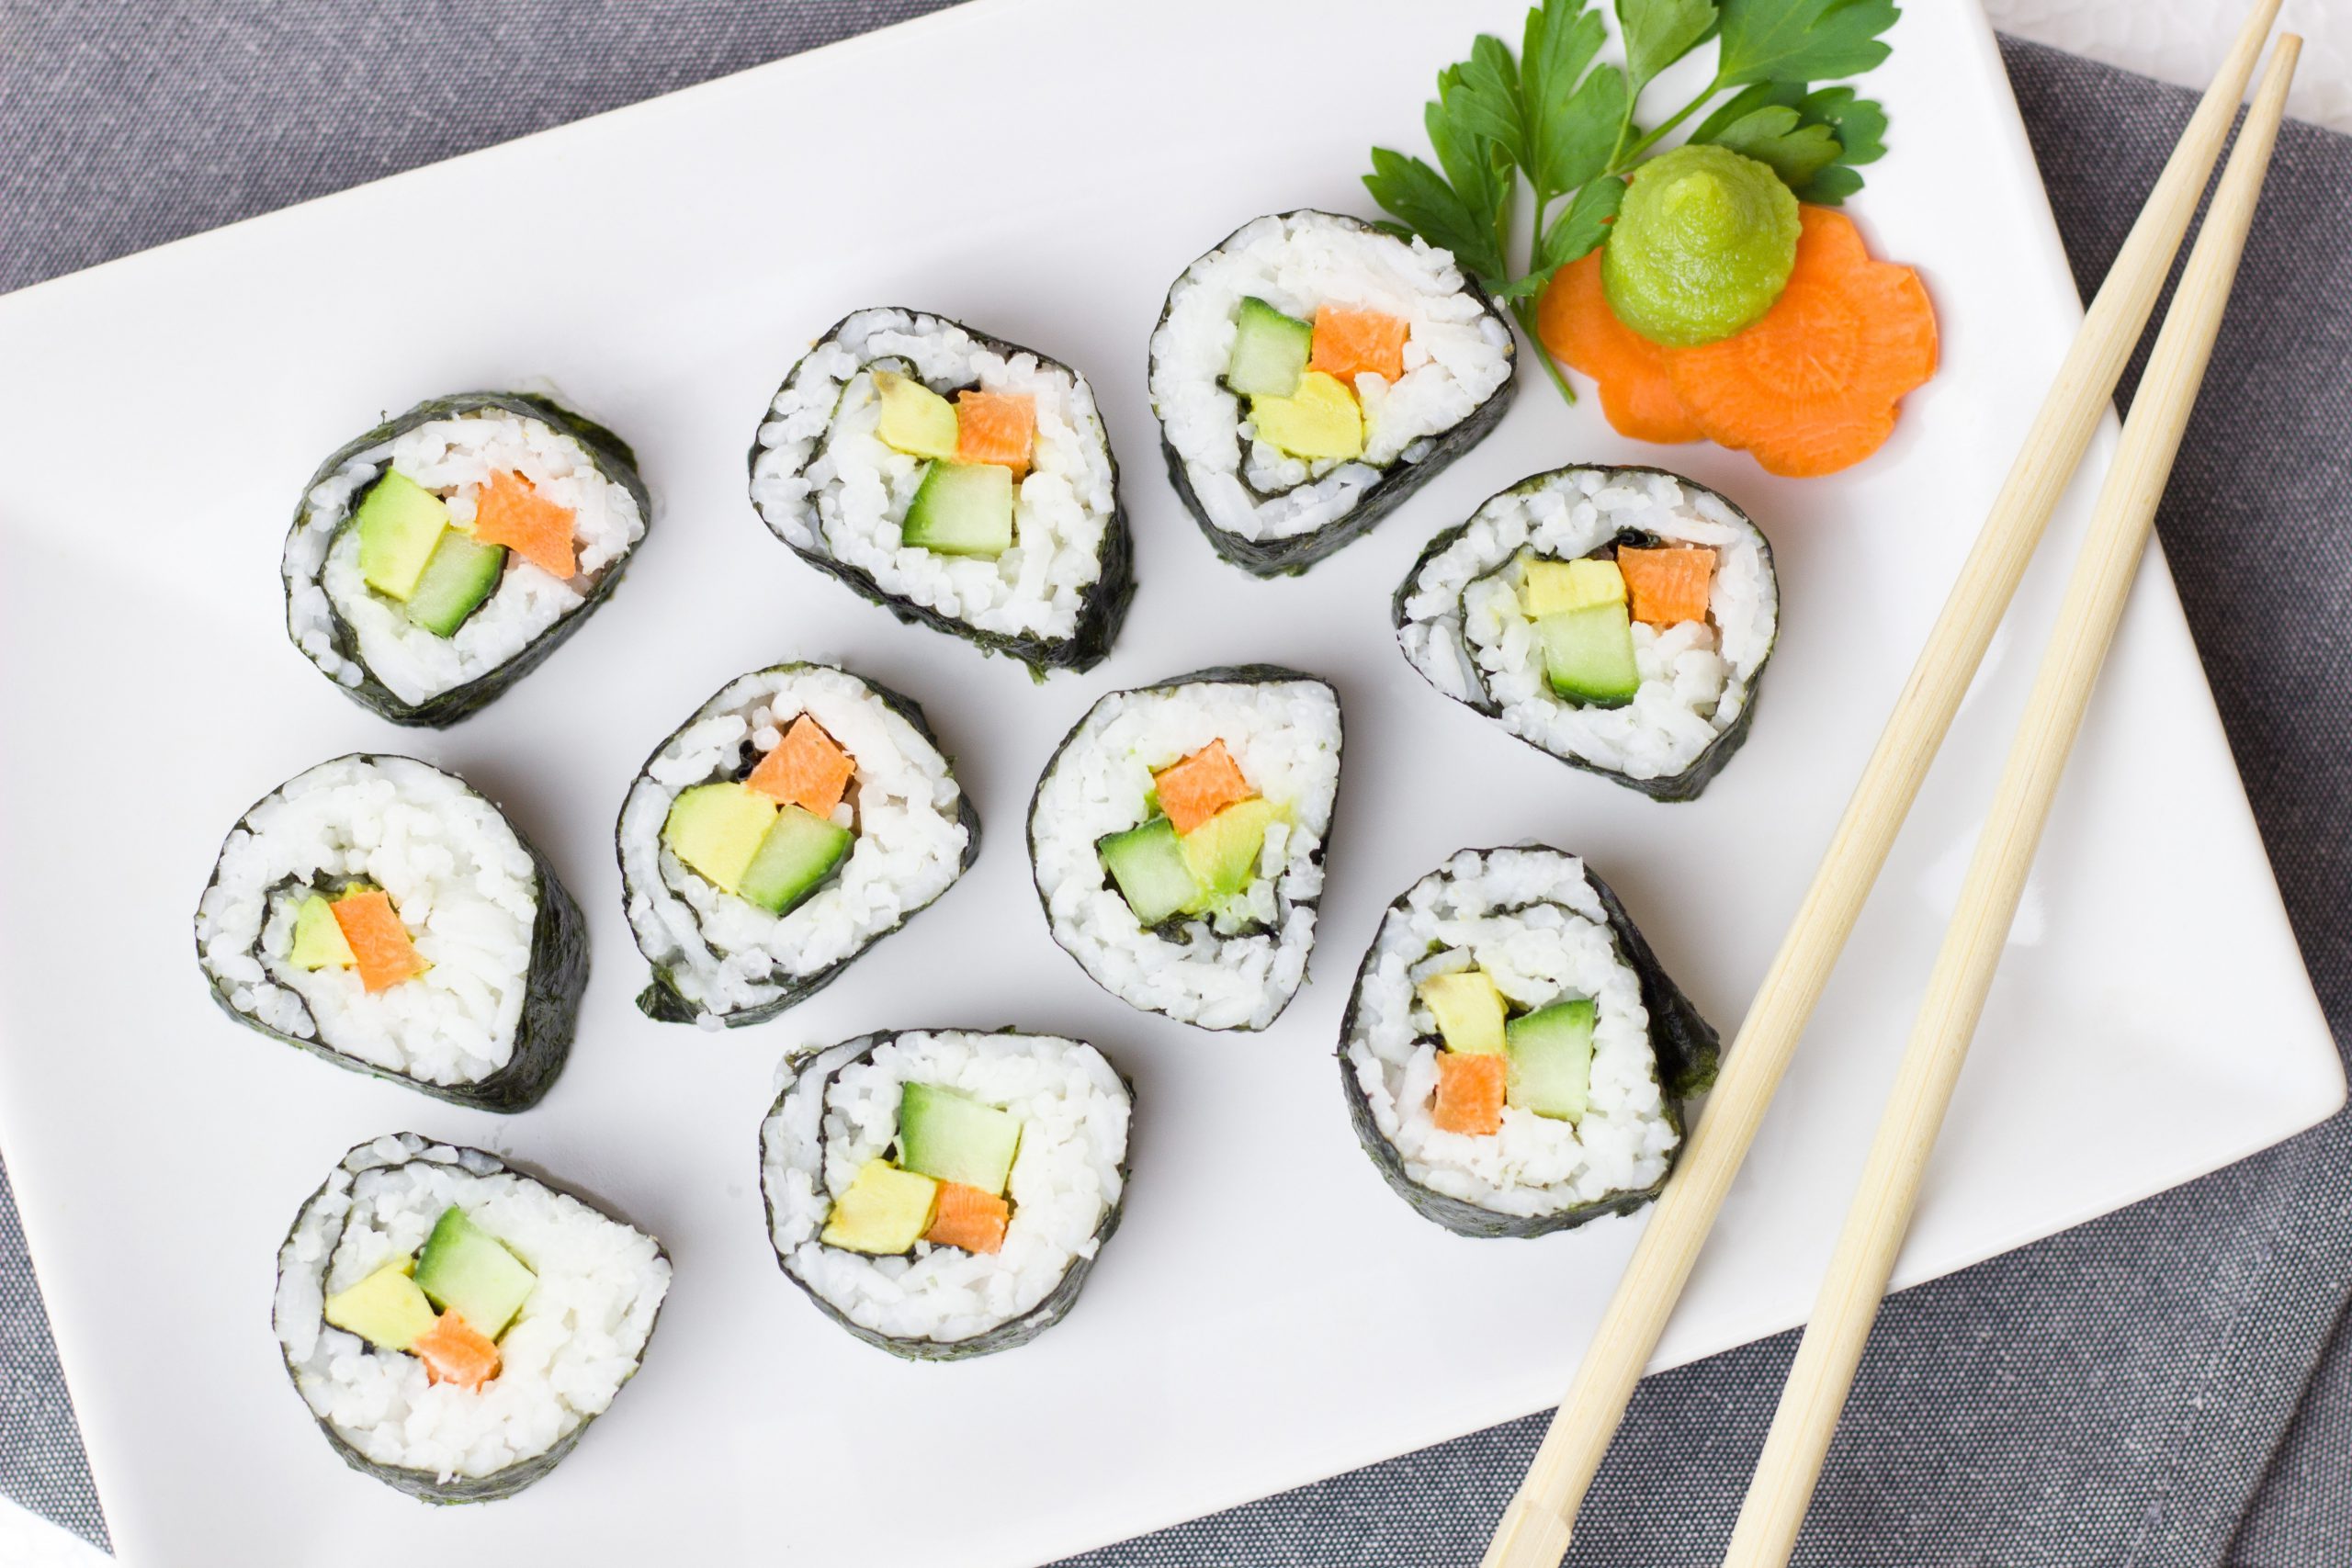 Best Sushi Recipes- How To Make Sushi Rolls At Home